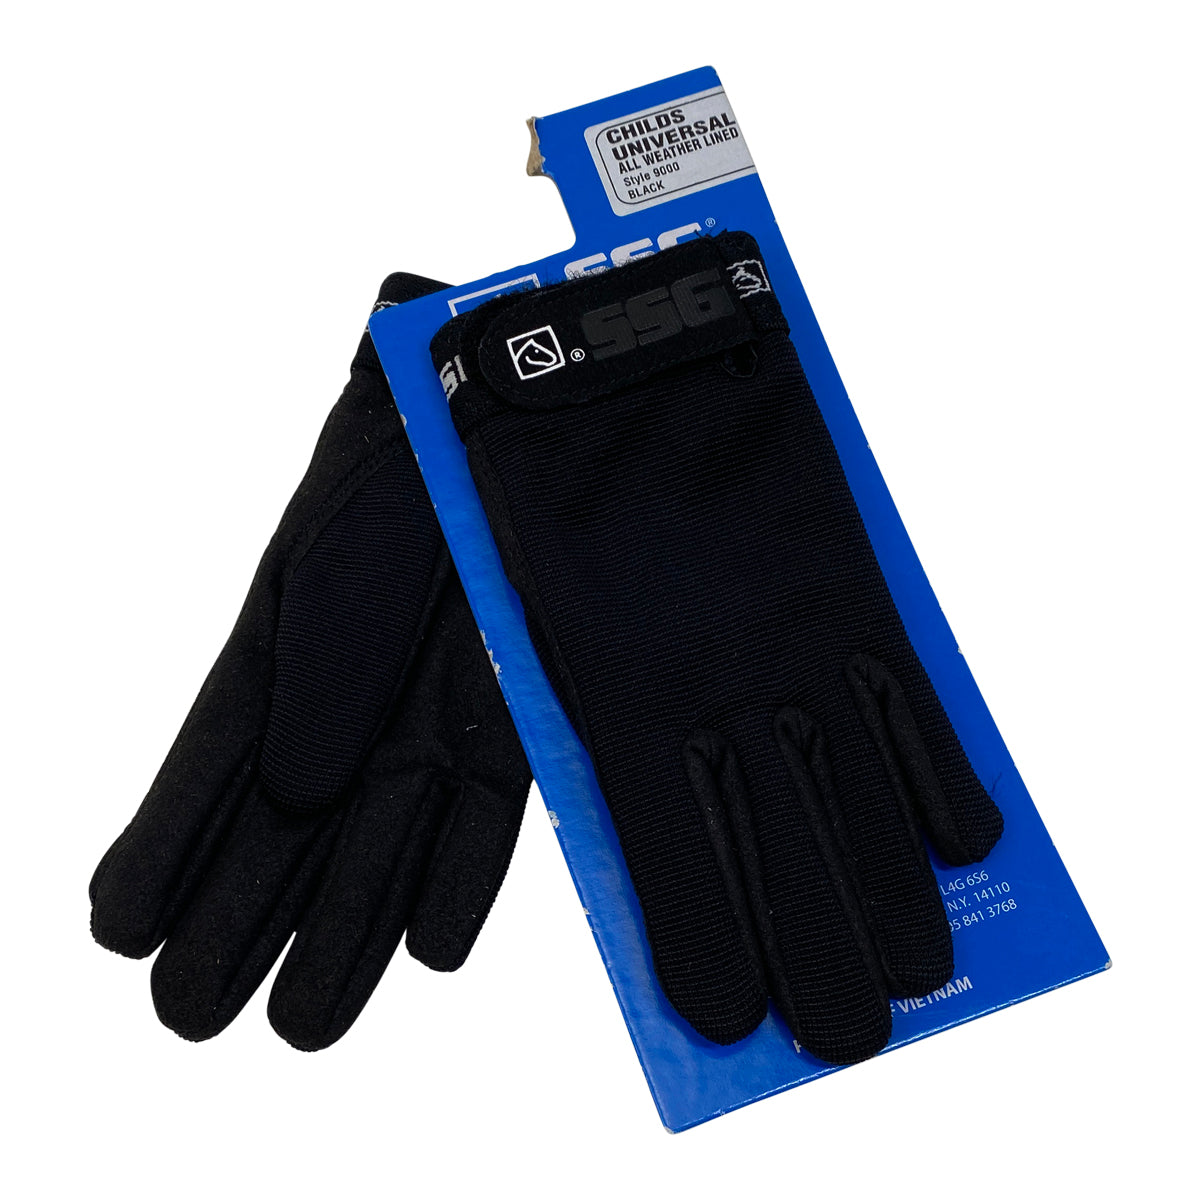 SSG All Weather Thinsulate Lined Gloves in Black